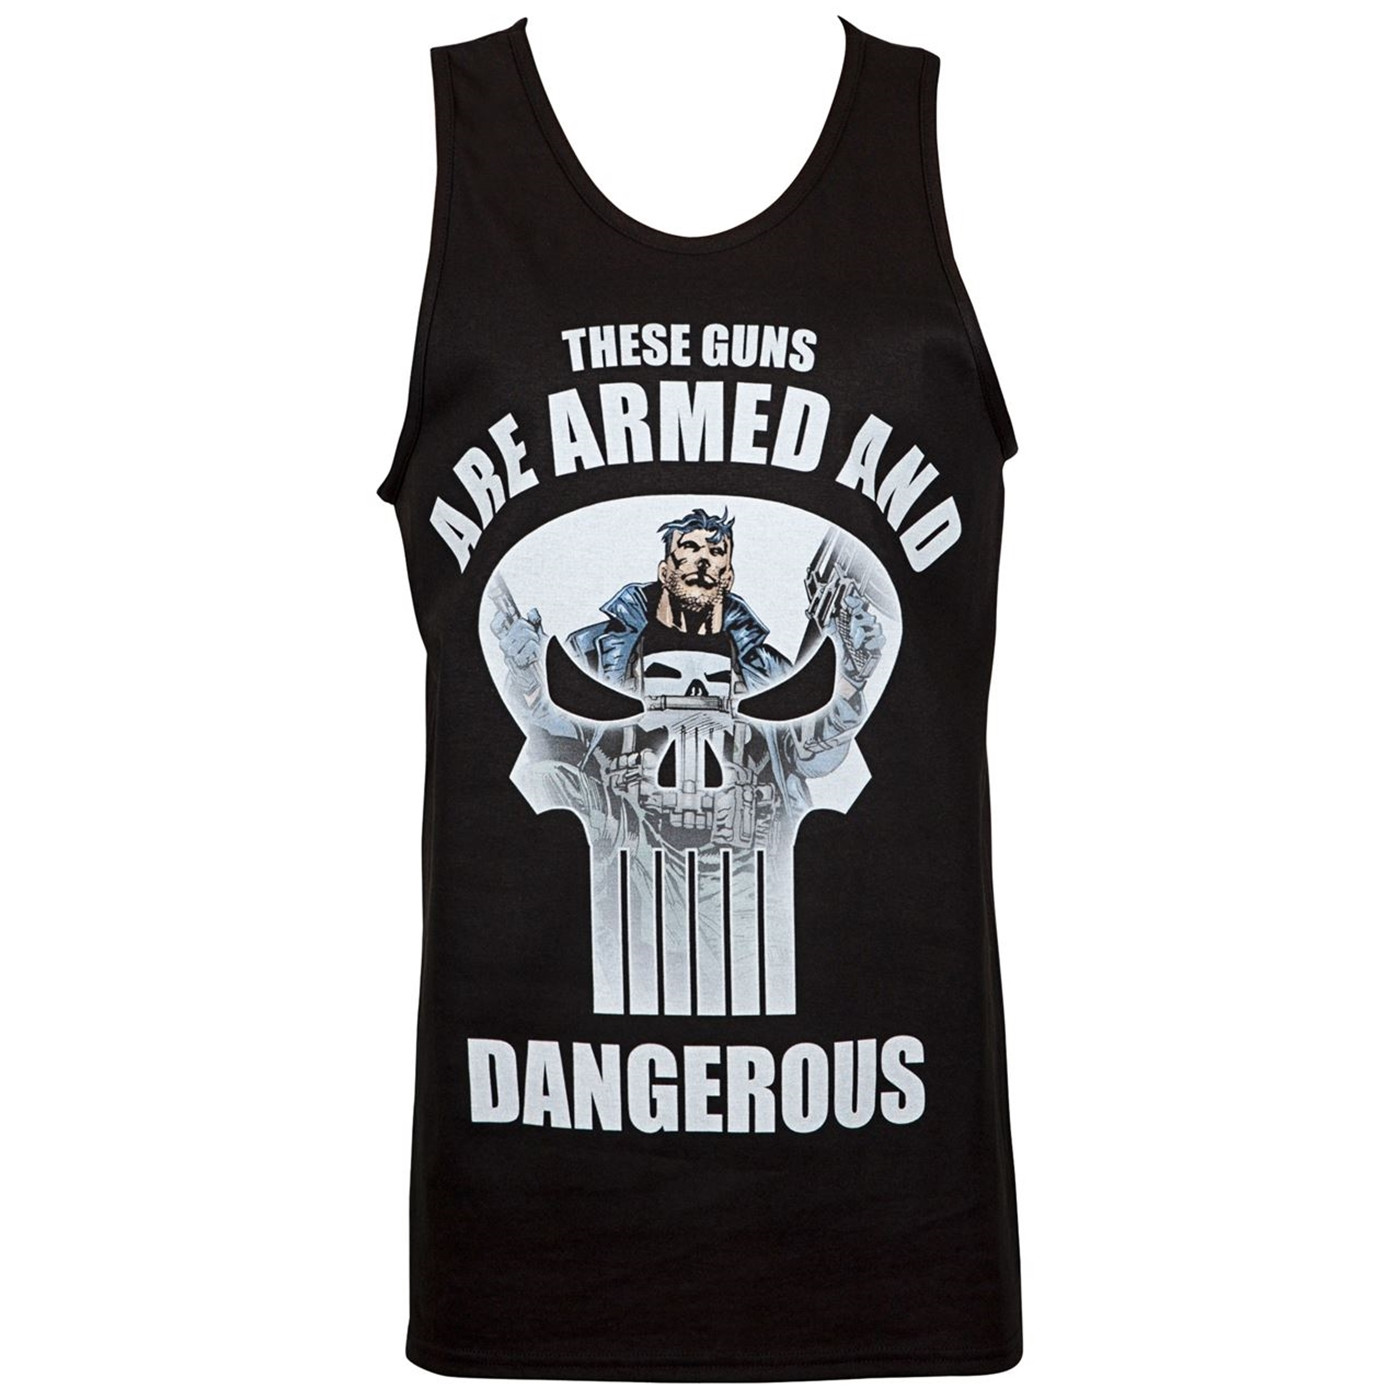 Punisher Guns are Armed and Dangerous Tank Top